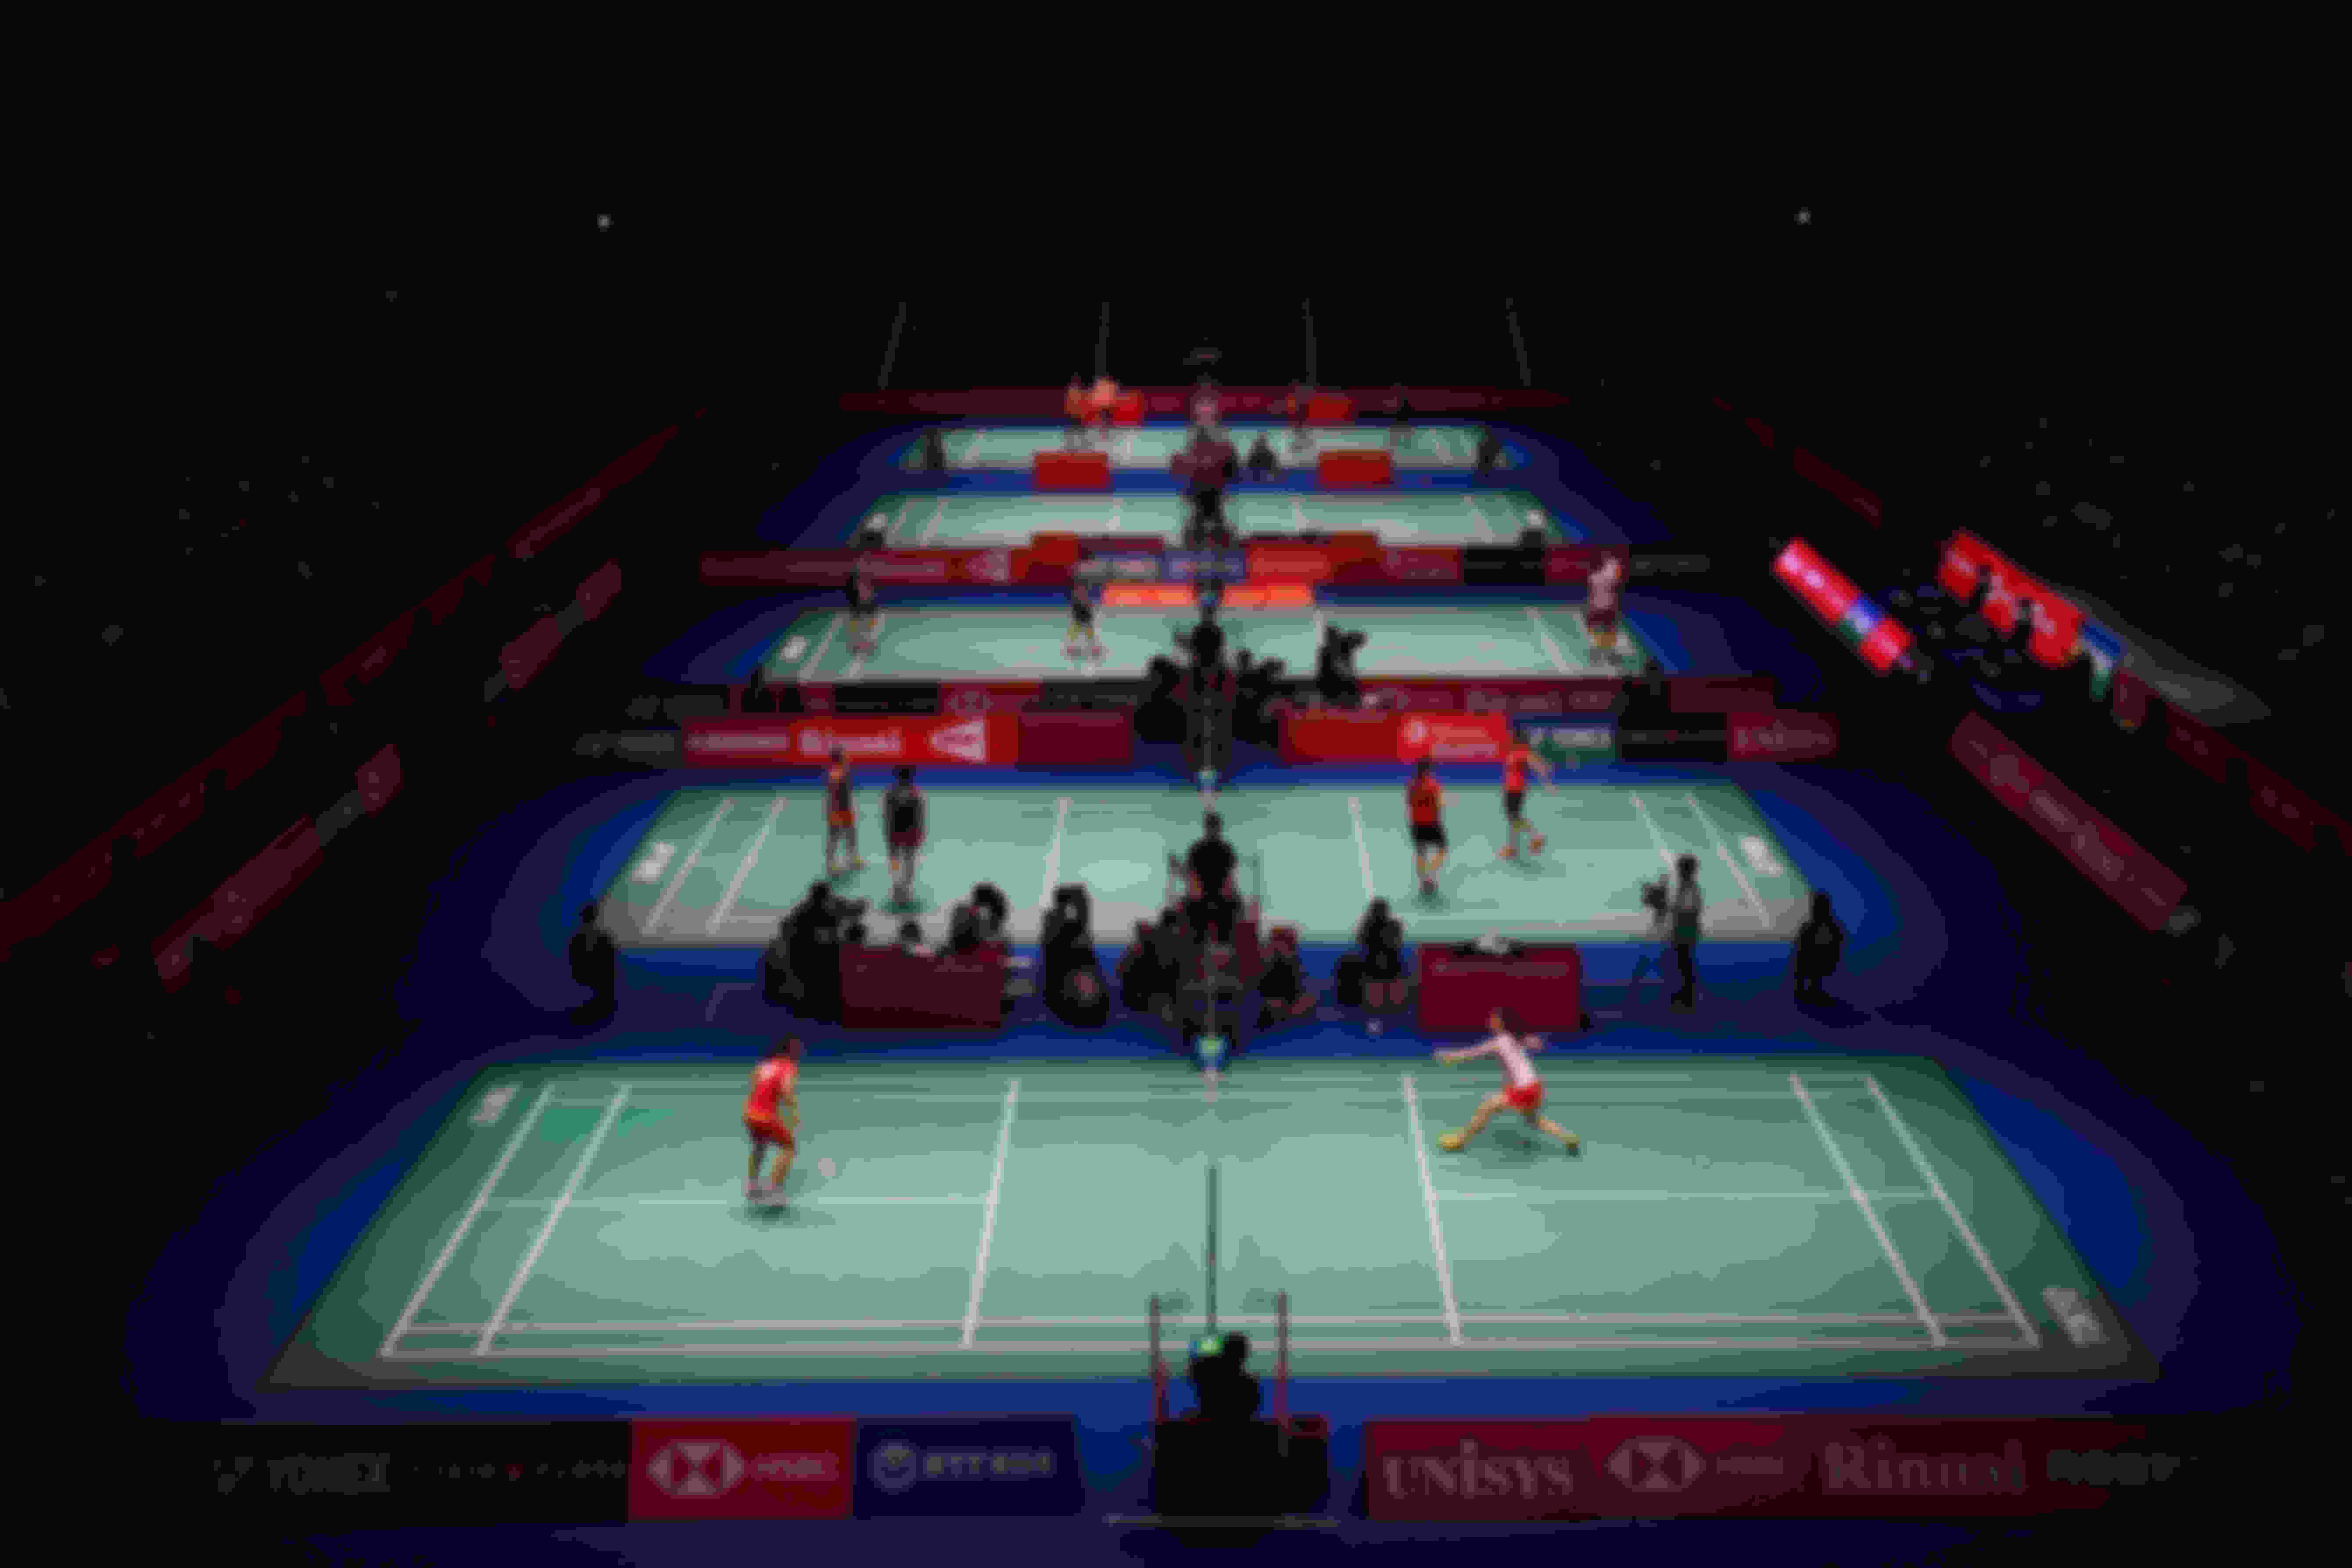 Action on badminton courts during the 2018 Japan Open